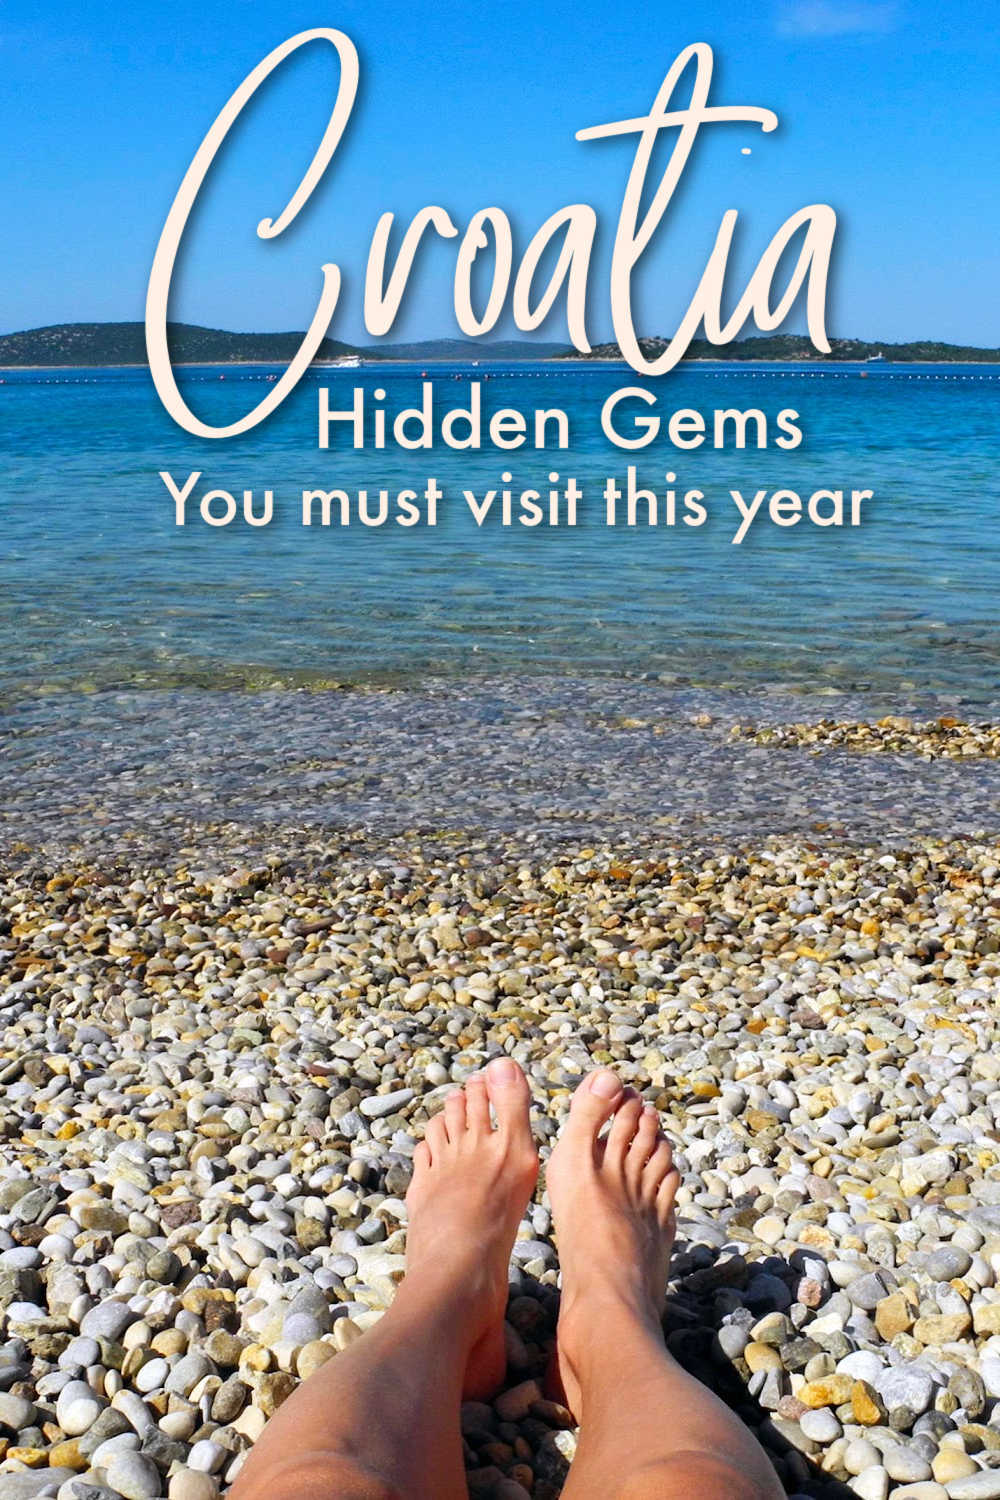 Beaches, castles, medieval villages, and waterfalls! 5 Stunning places you must visit in Croatia before they became famous.Here is a guide on how to get to these secret spots in Croatia, what to do there, where to stay, and what to eat. A complete and easy guide to discovering Croatia's hidden gems to visit this year!Croatia Beaches | Croatia Castle | Croatia places to visit | Croatia what to do | hidden gems in Croatia | Croatia secret spots | Croatia hidden places |